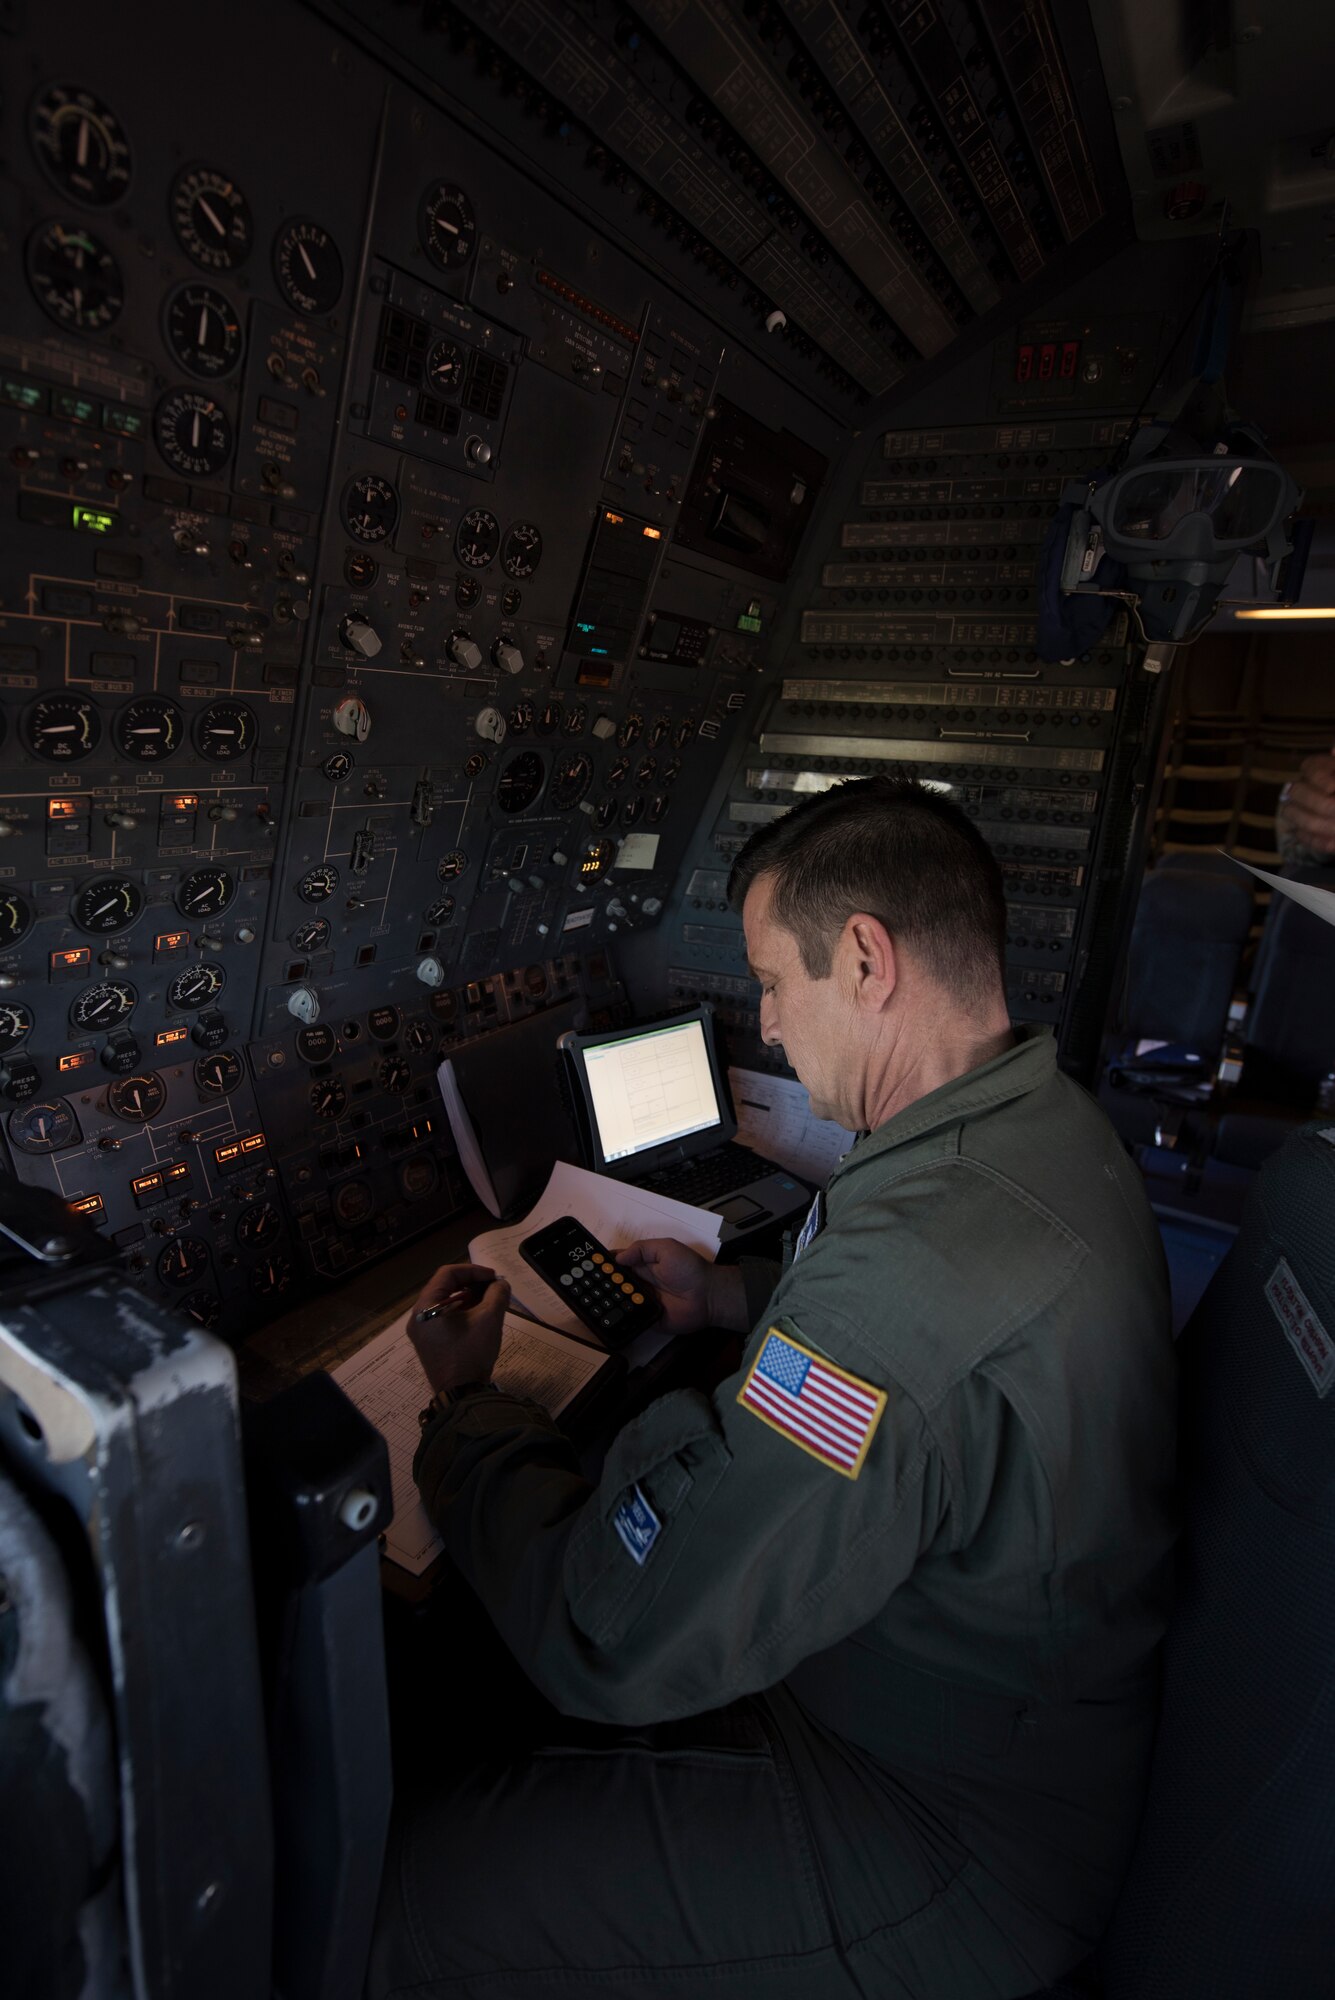 Master Sgt. Scott Dillinger, 6th Air Refueling Squadron noncommissioned officer in charge of standardization and evaluation and a KC-10 Extender flight engineer, conducts pre-flight checks inside the cockpit of a KC-10 at Eielson Air Force, Base, Alaska, June 6, 2018. Dillinger and his crew flew the aircraft to support refueling operations in the Pacific theater. During the five-day mission, Dillinger surpassed 10,000 flight hours. (U.S. Air Force photo by Tech. Sgt. James Hodgman)